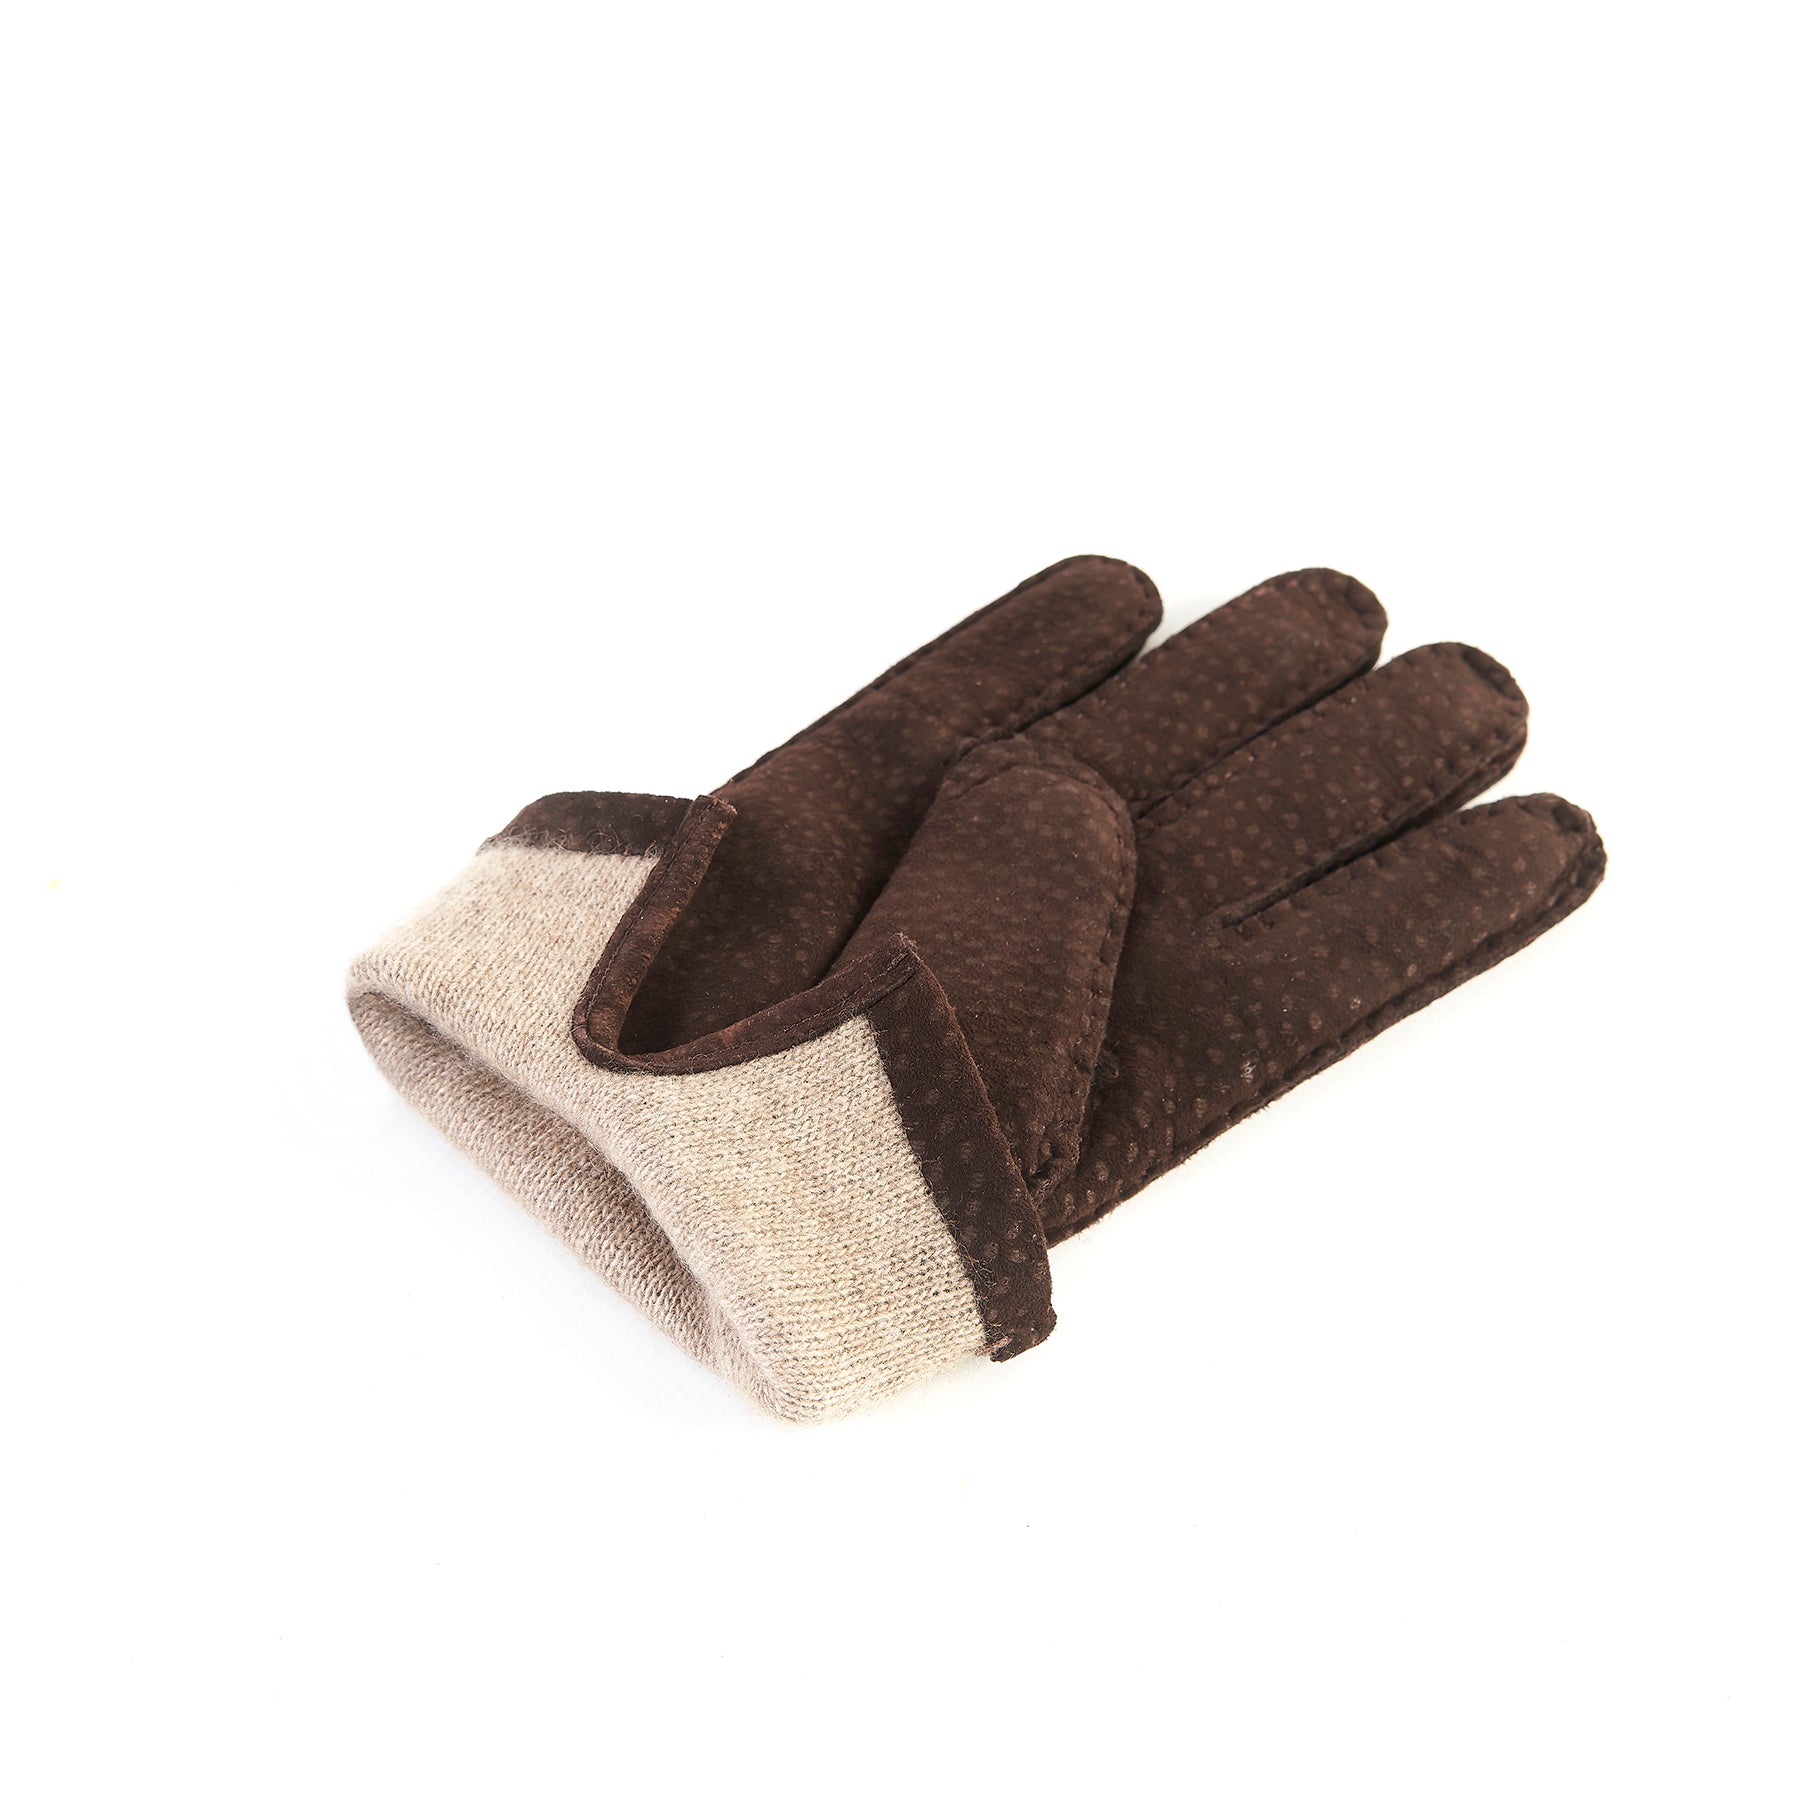 Men's hand-stitched brown carpincho gloves cashmere lined